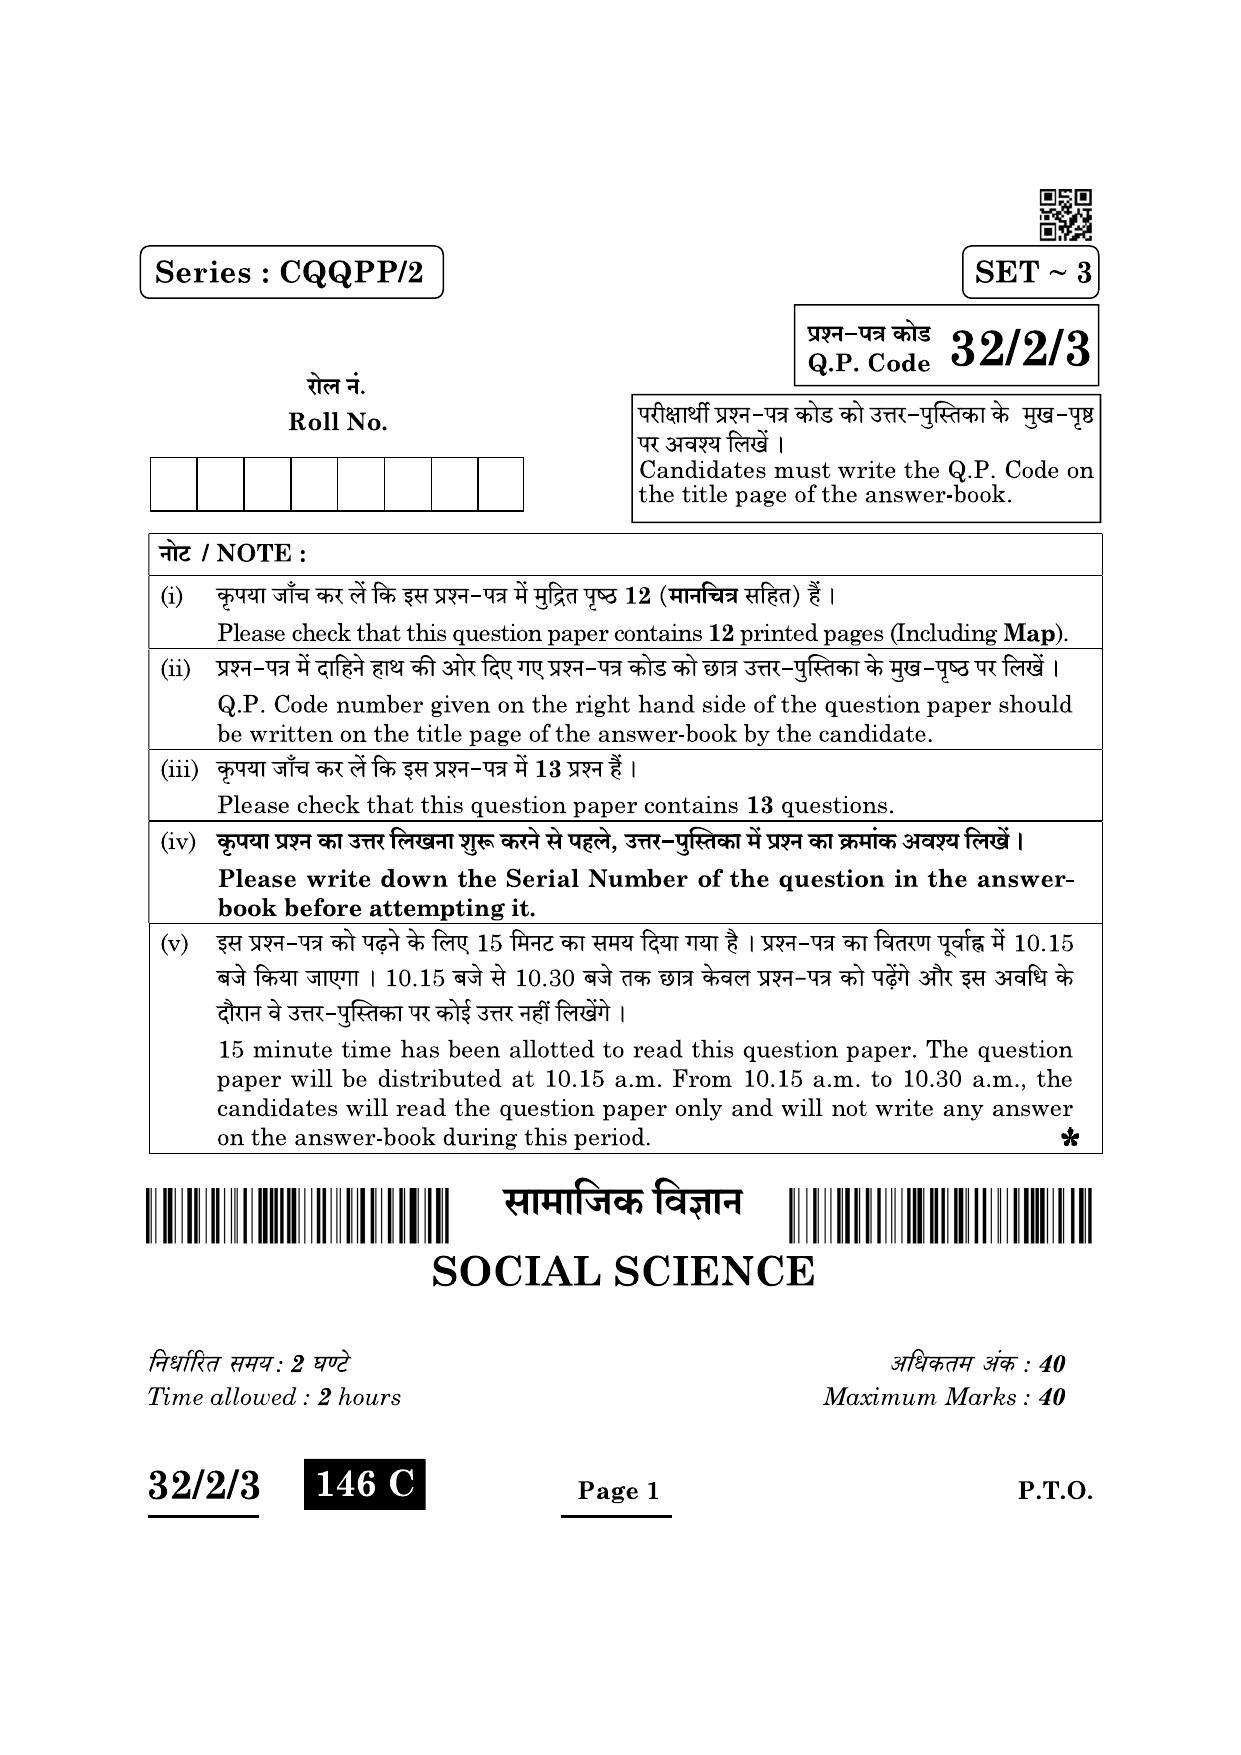 CBSE Class 10 32-2-3 Social Science 2022 Question Paper - Page 1